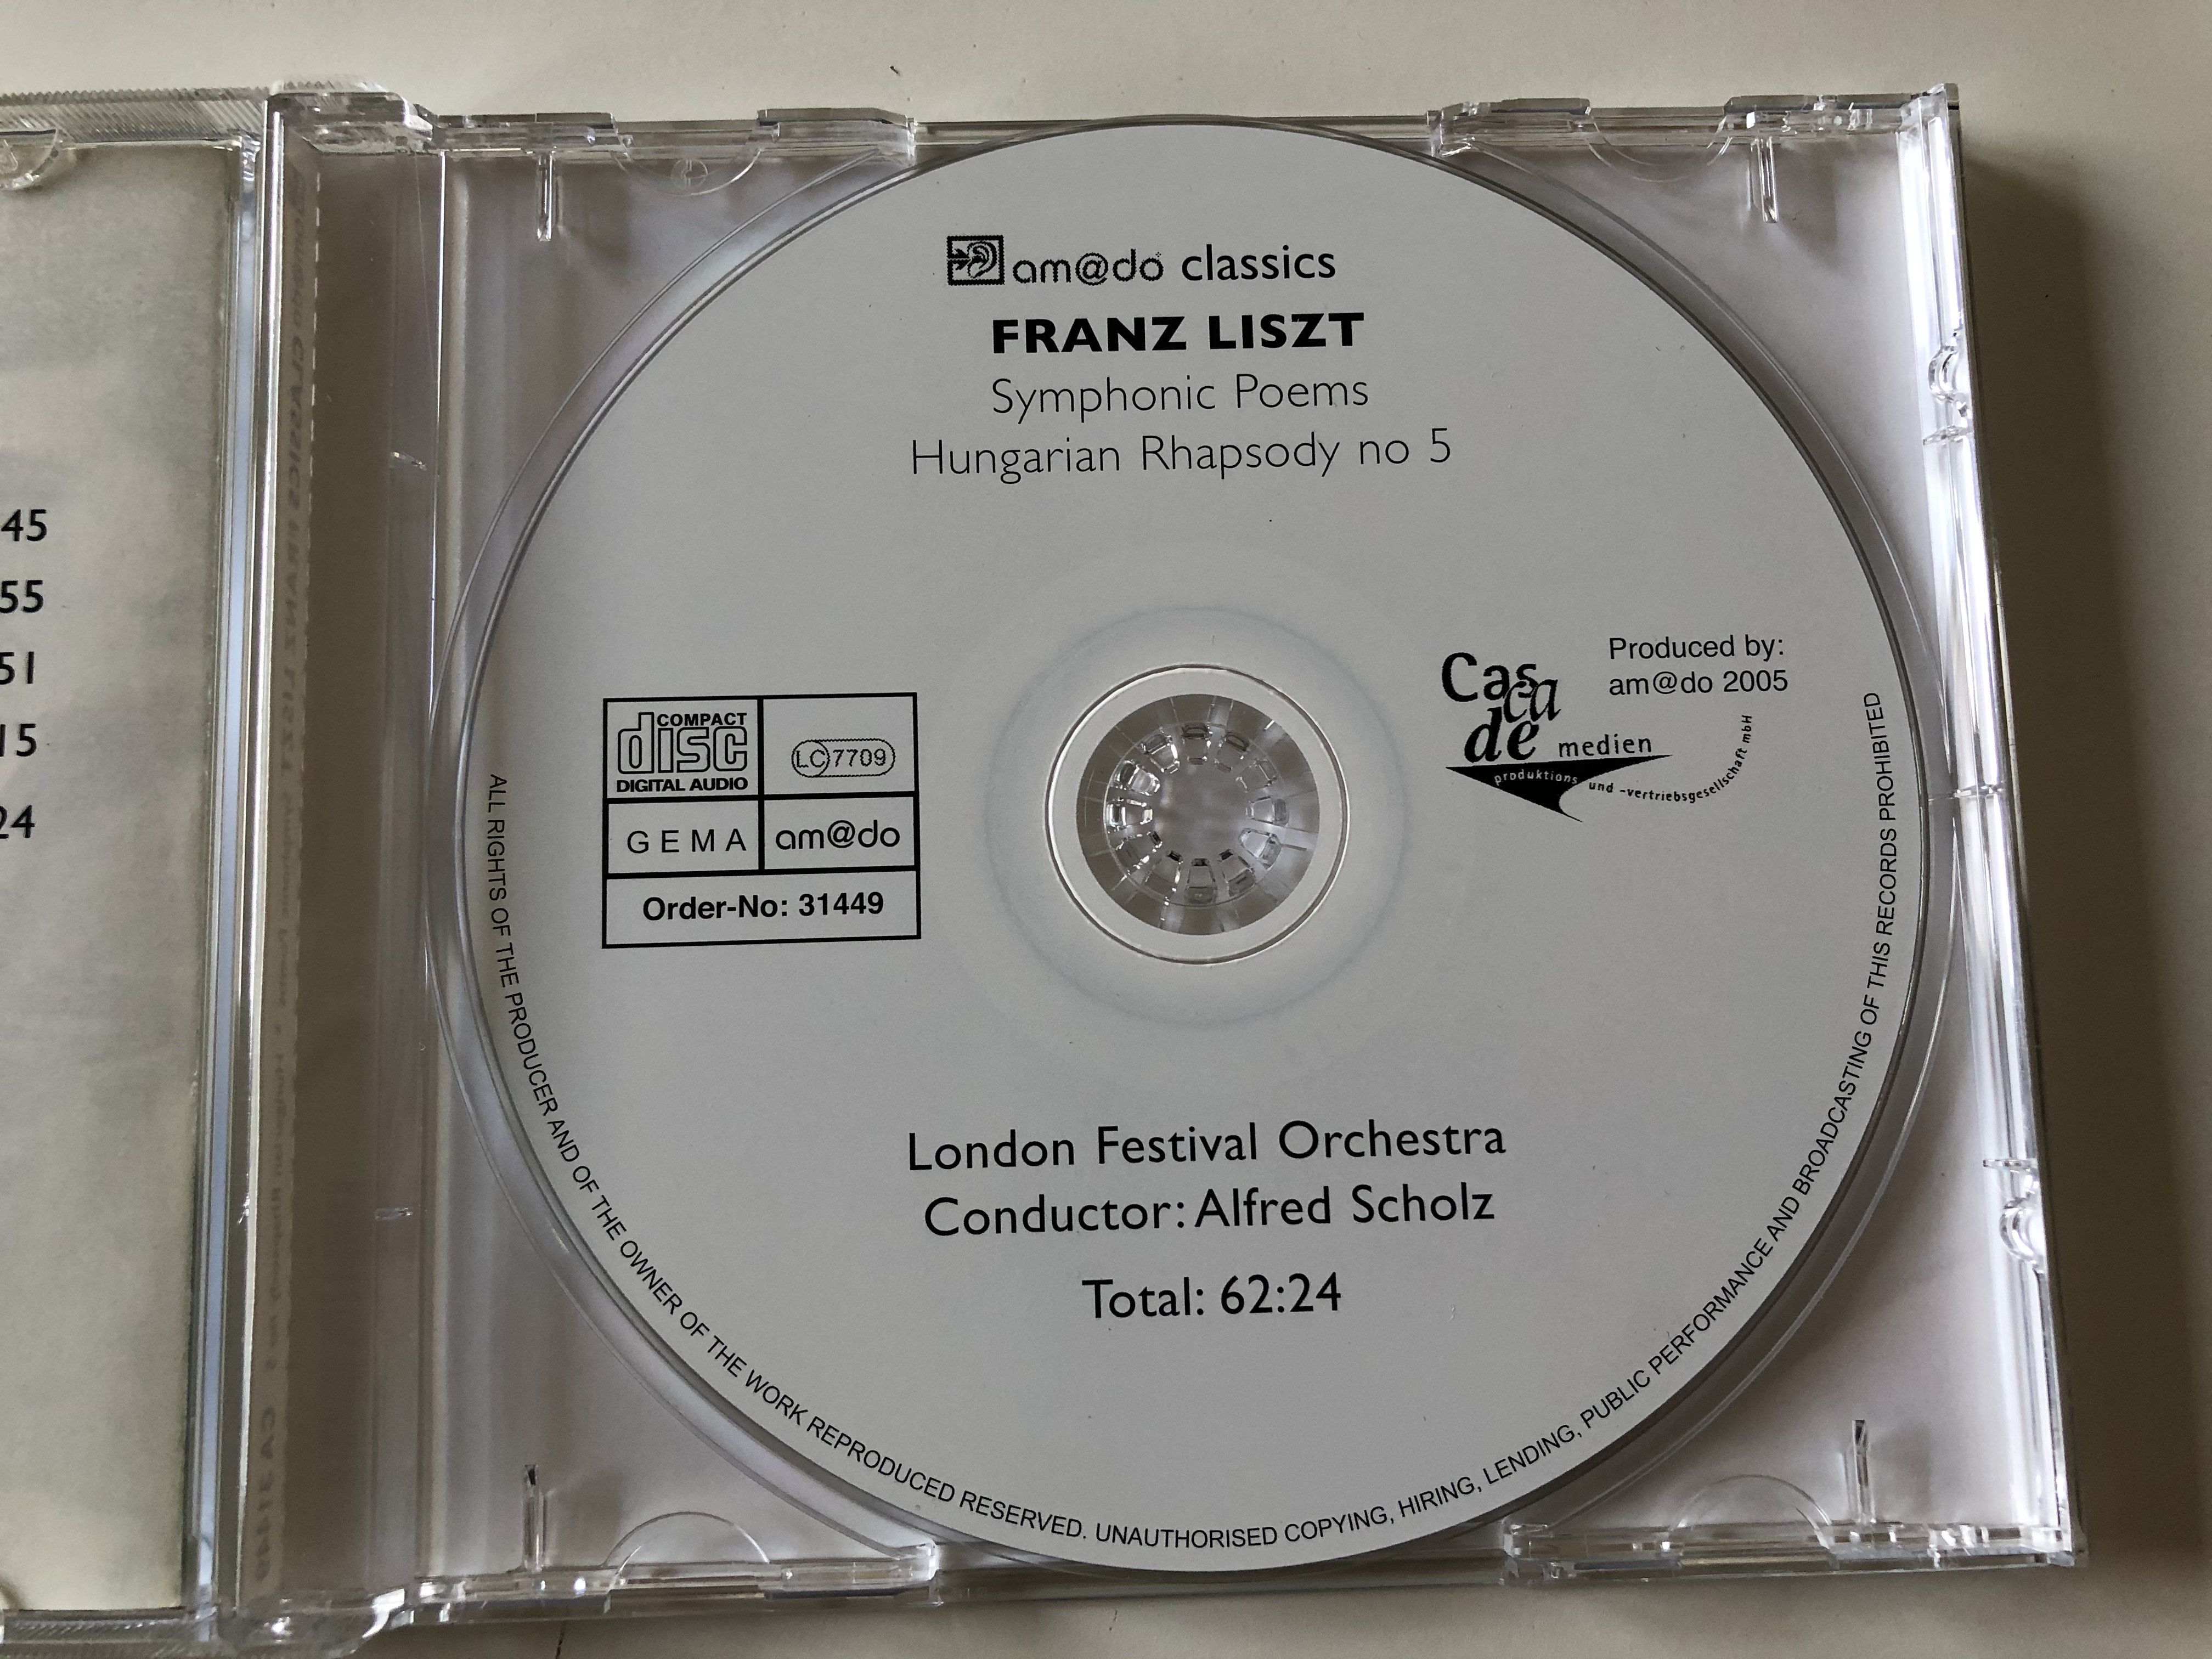 franz-liszt-symphonic-poems-nos-2-3-and-4-hungarian-rhapsody-no-5-london-festival-orchestra-conductor-alfred-scholz-amado-audio-cd-2005-31449-4-.jpg